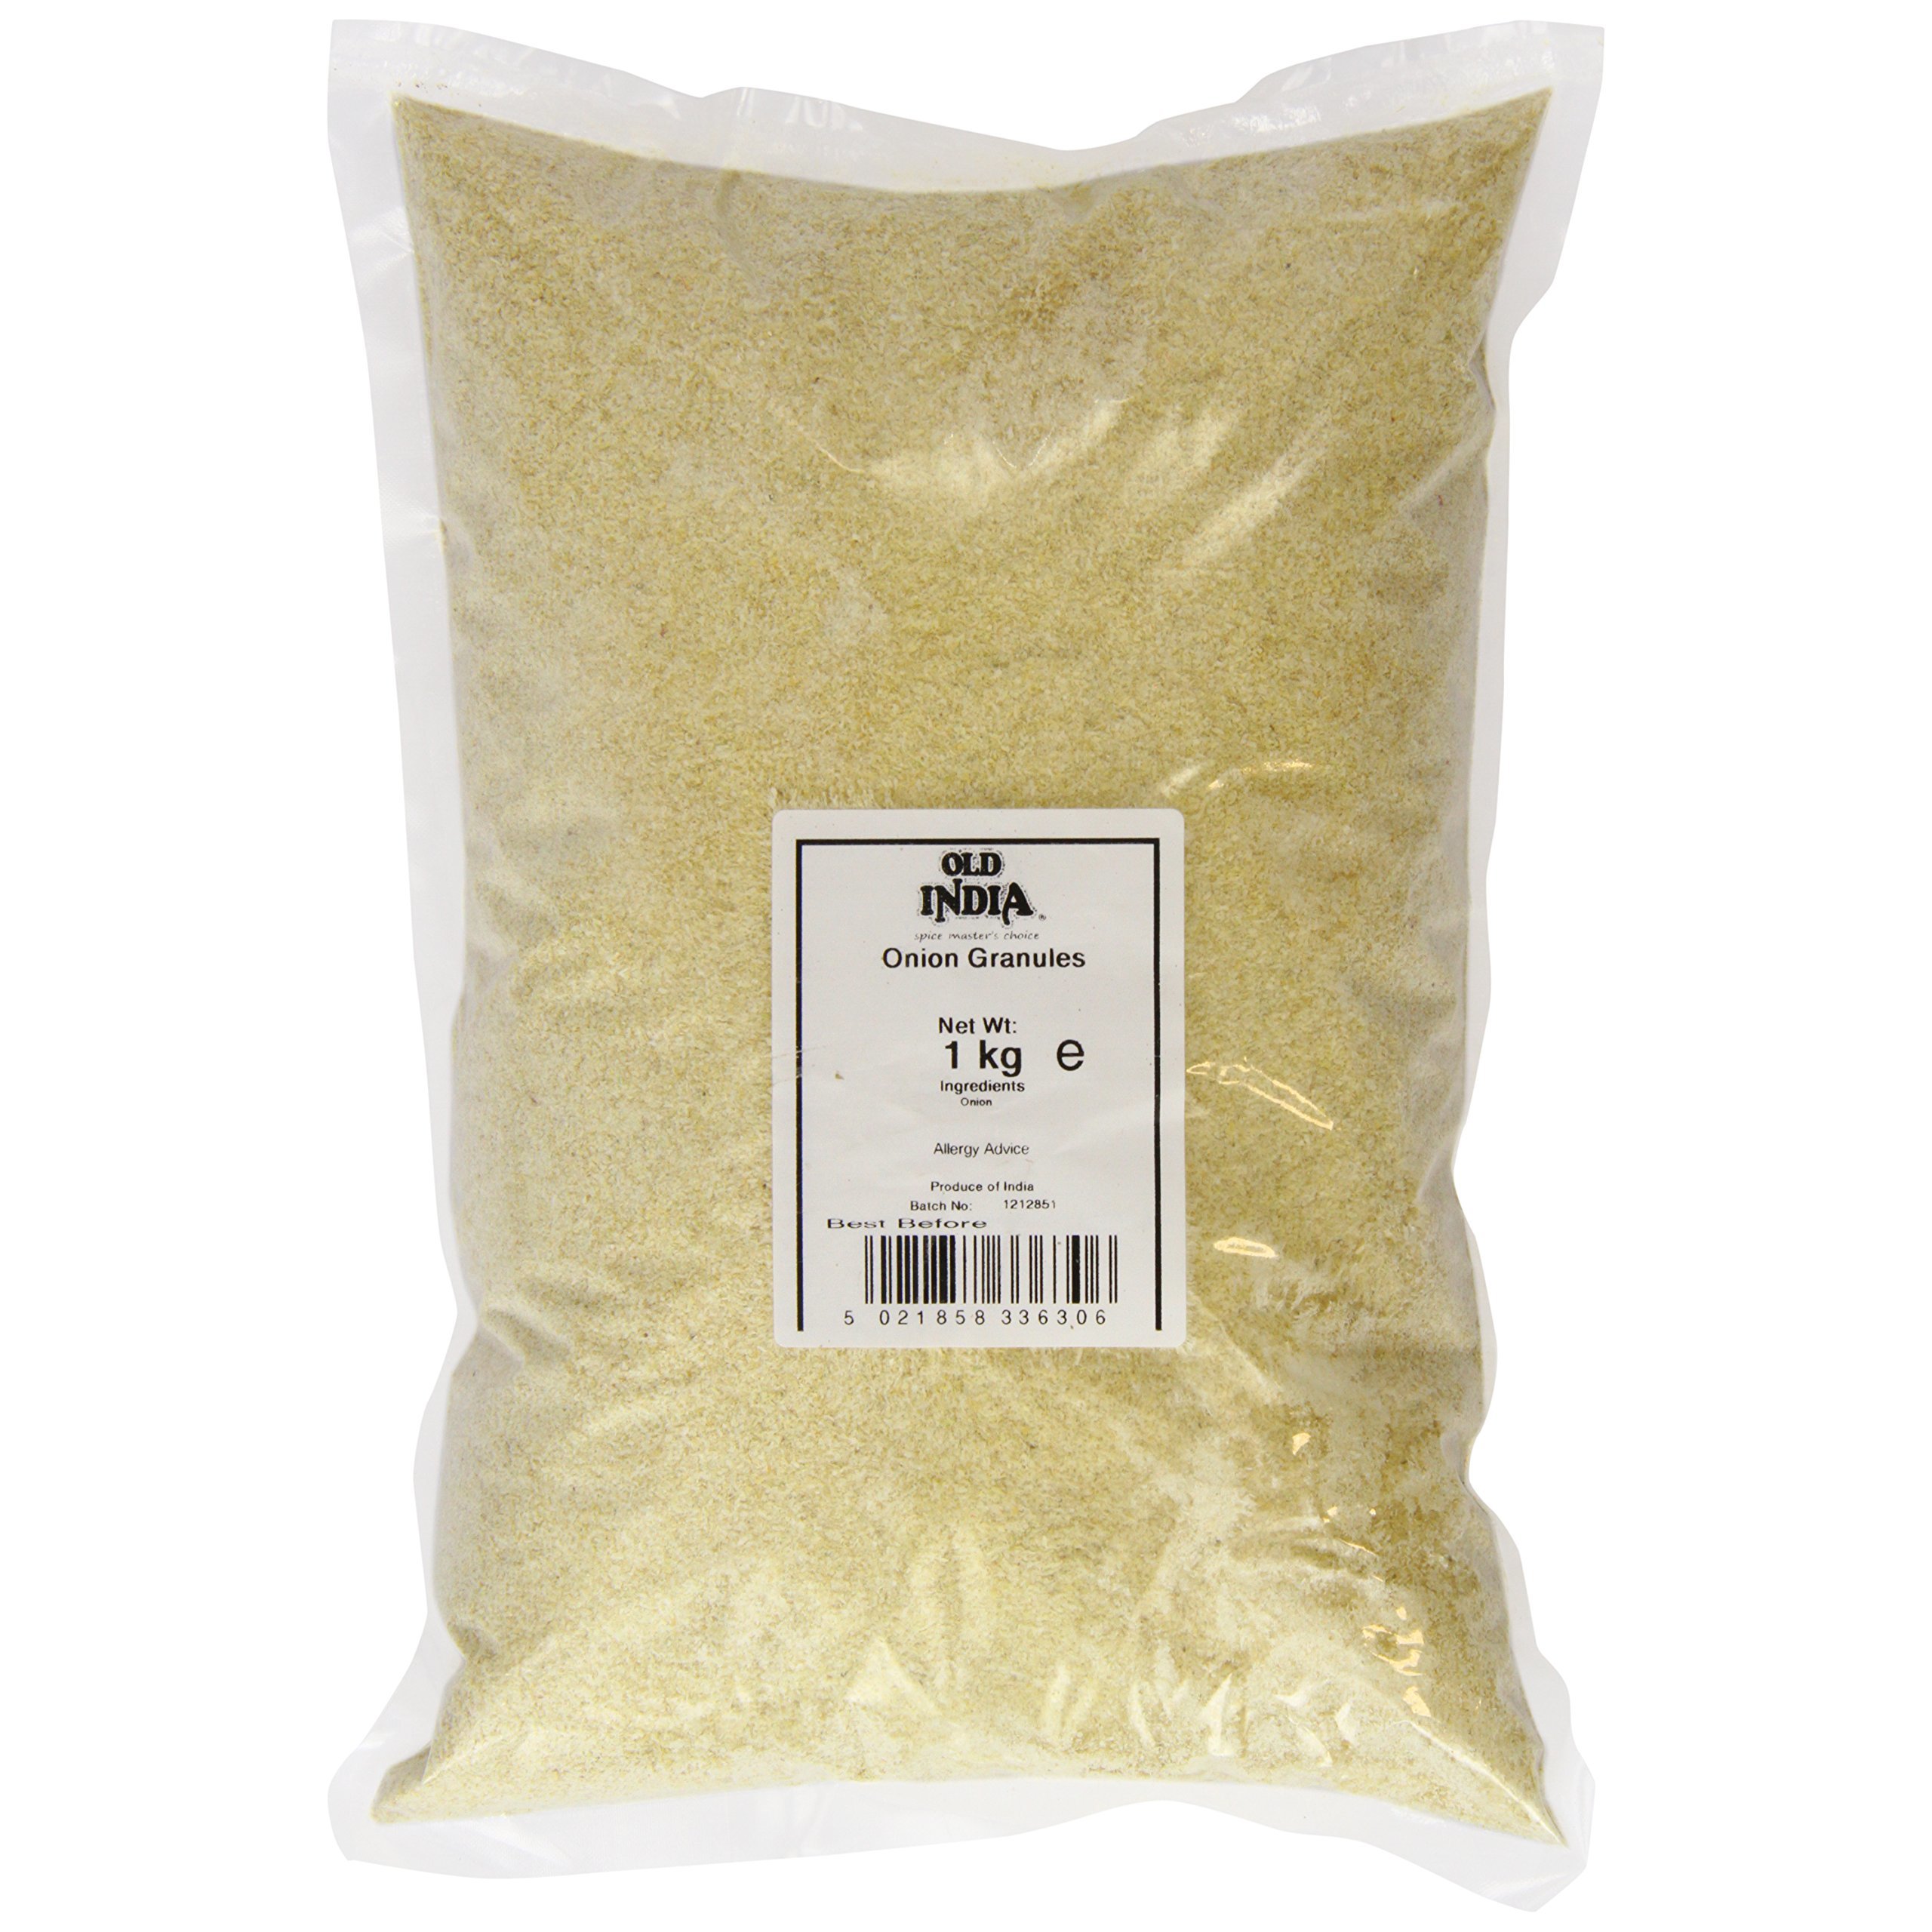 Old India Onion Granules 1 Kg